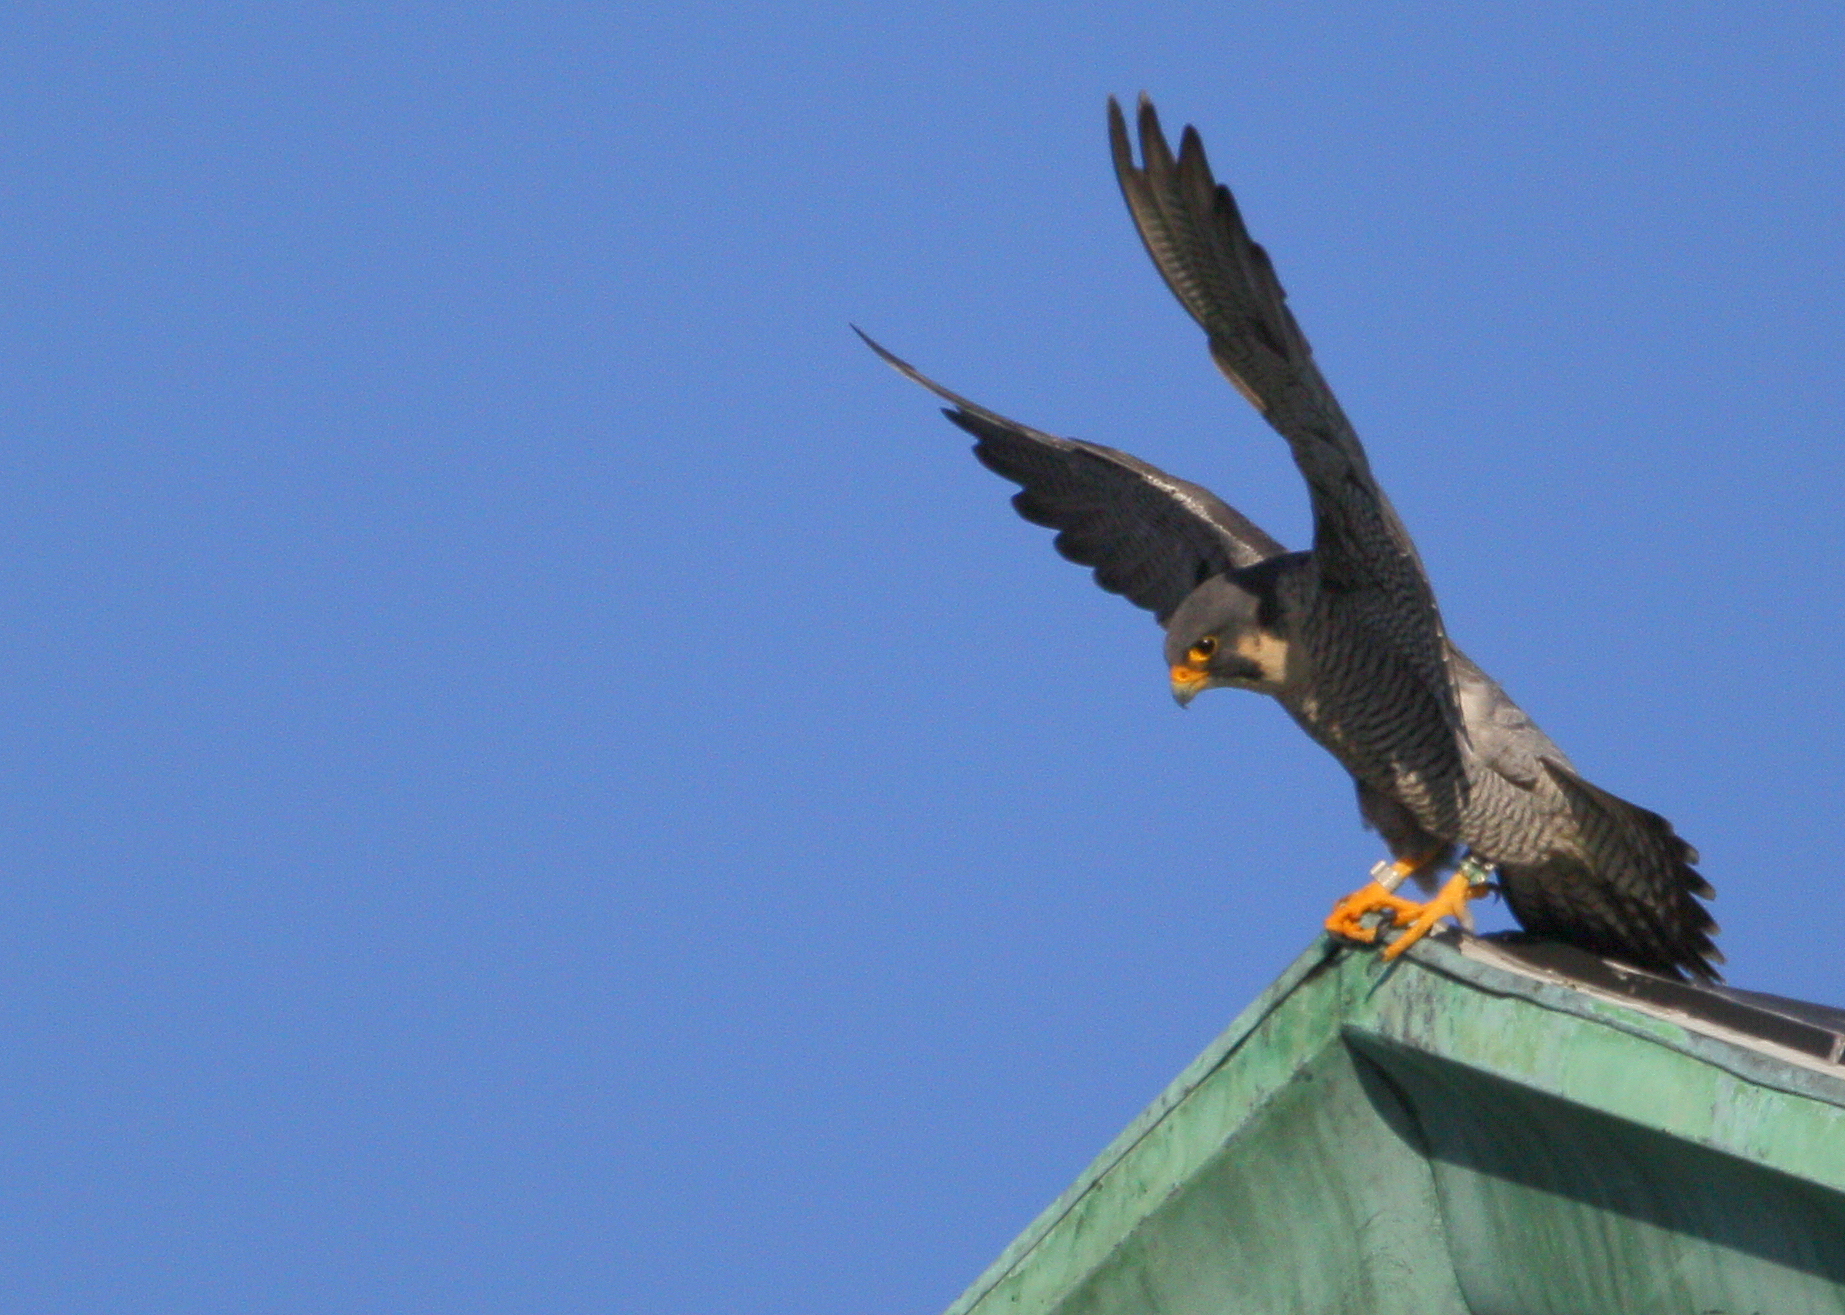 Peregrine: shifting position